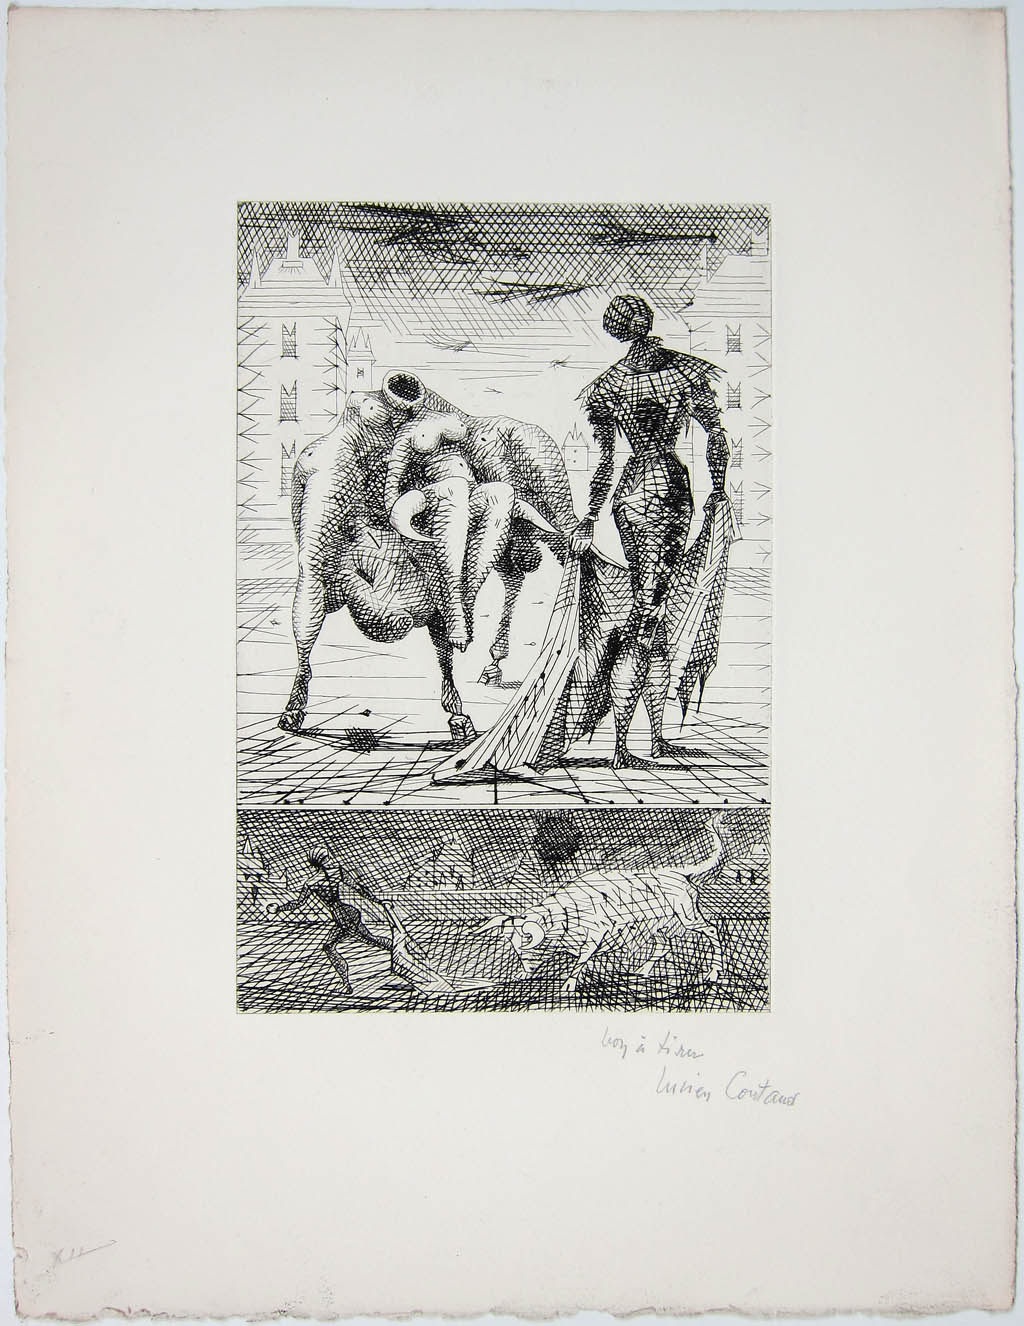 Lucien Coutaud - Le Taureau Blanc (Plate XII) - 1956 etching